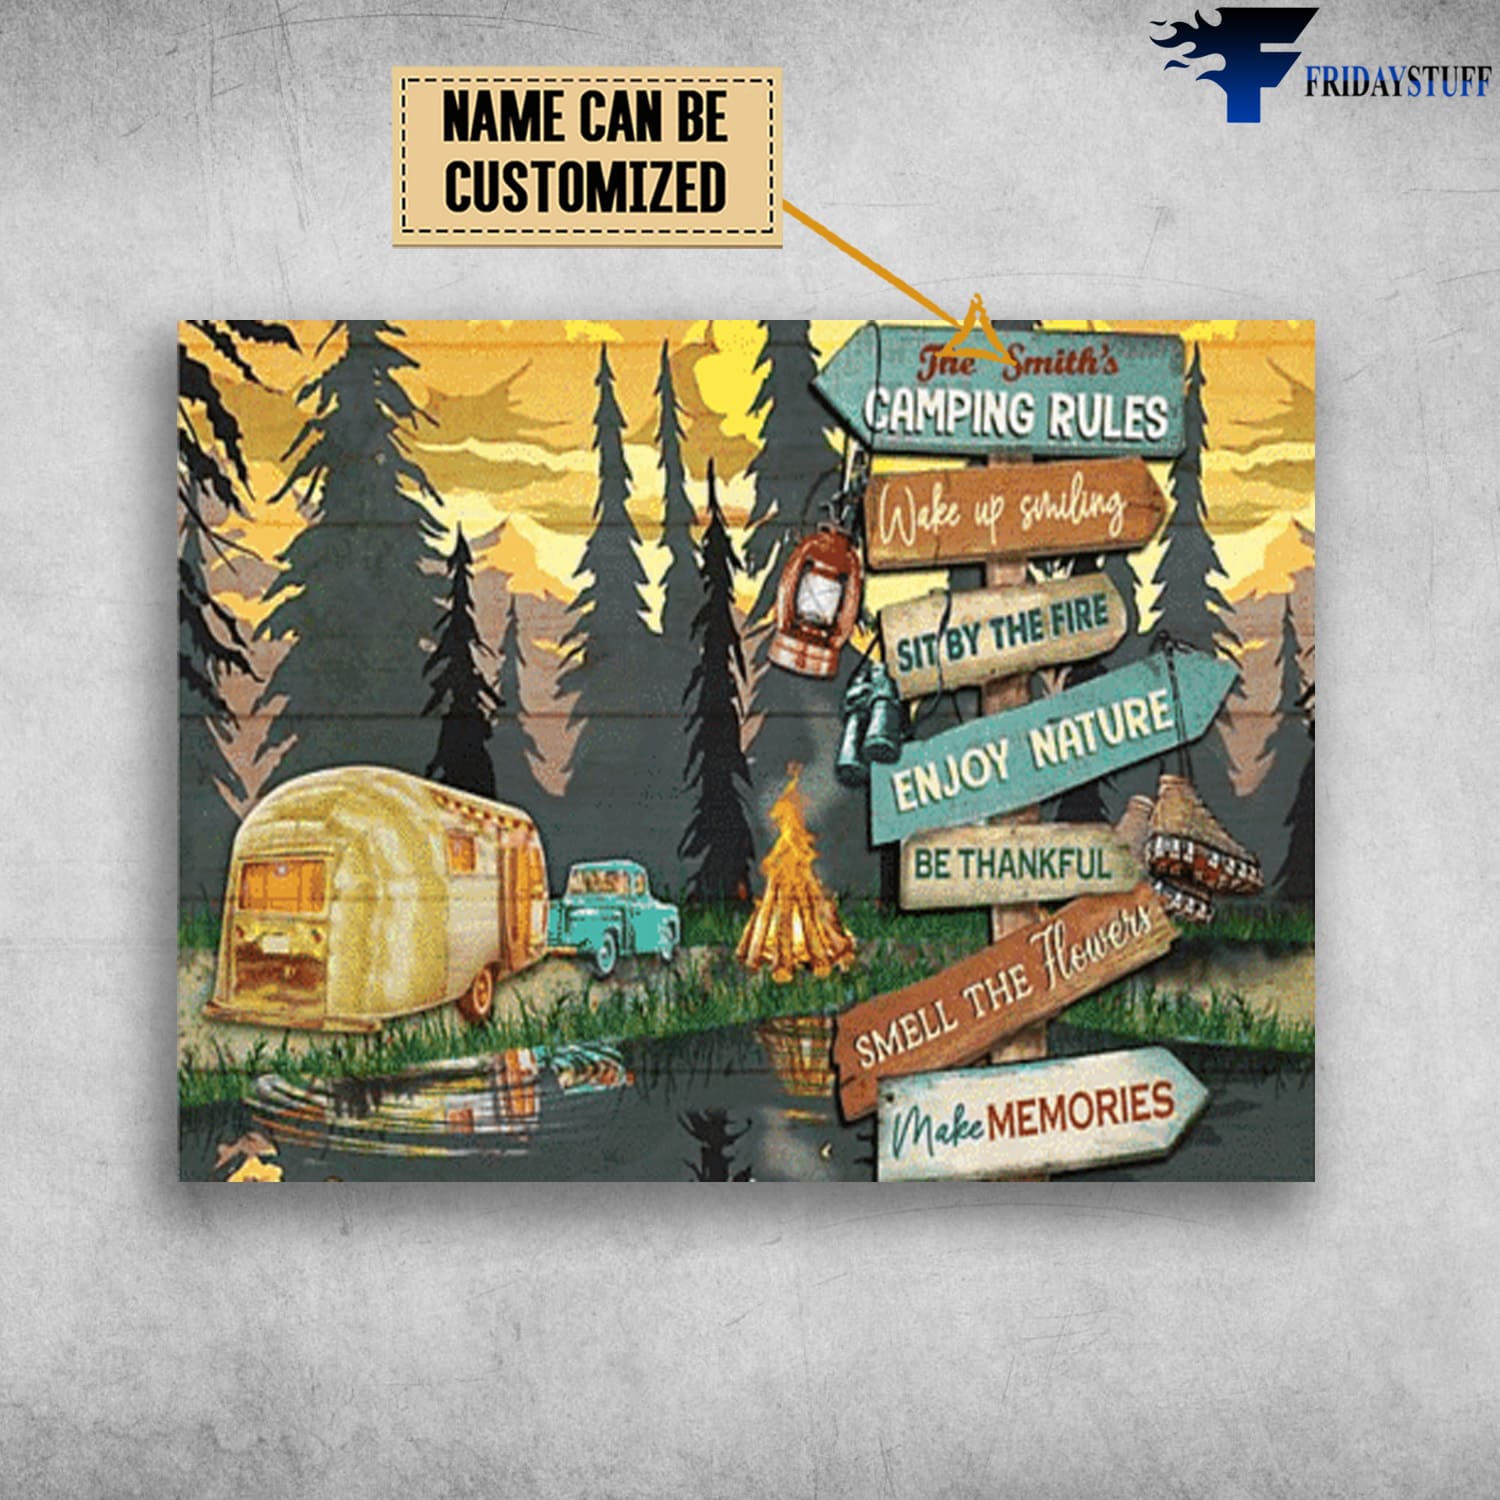 Camping Poster, Camping Lover, Wake Up Smiling, Sit By The Fire, Enjoy Nature, Be Thankful, Smell The Flowers, Make Memories